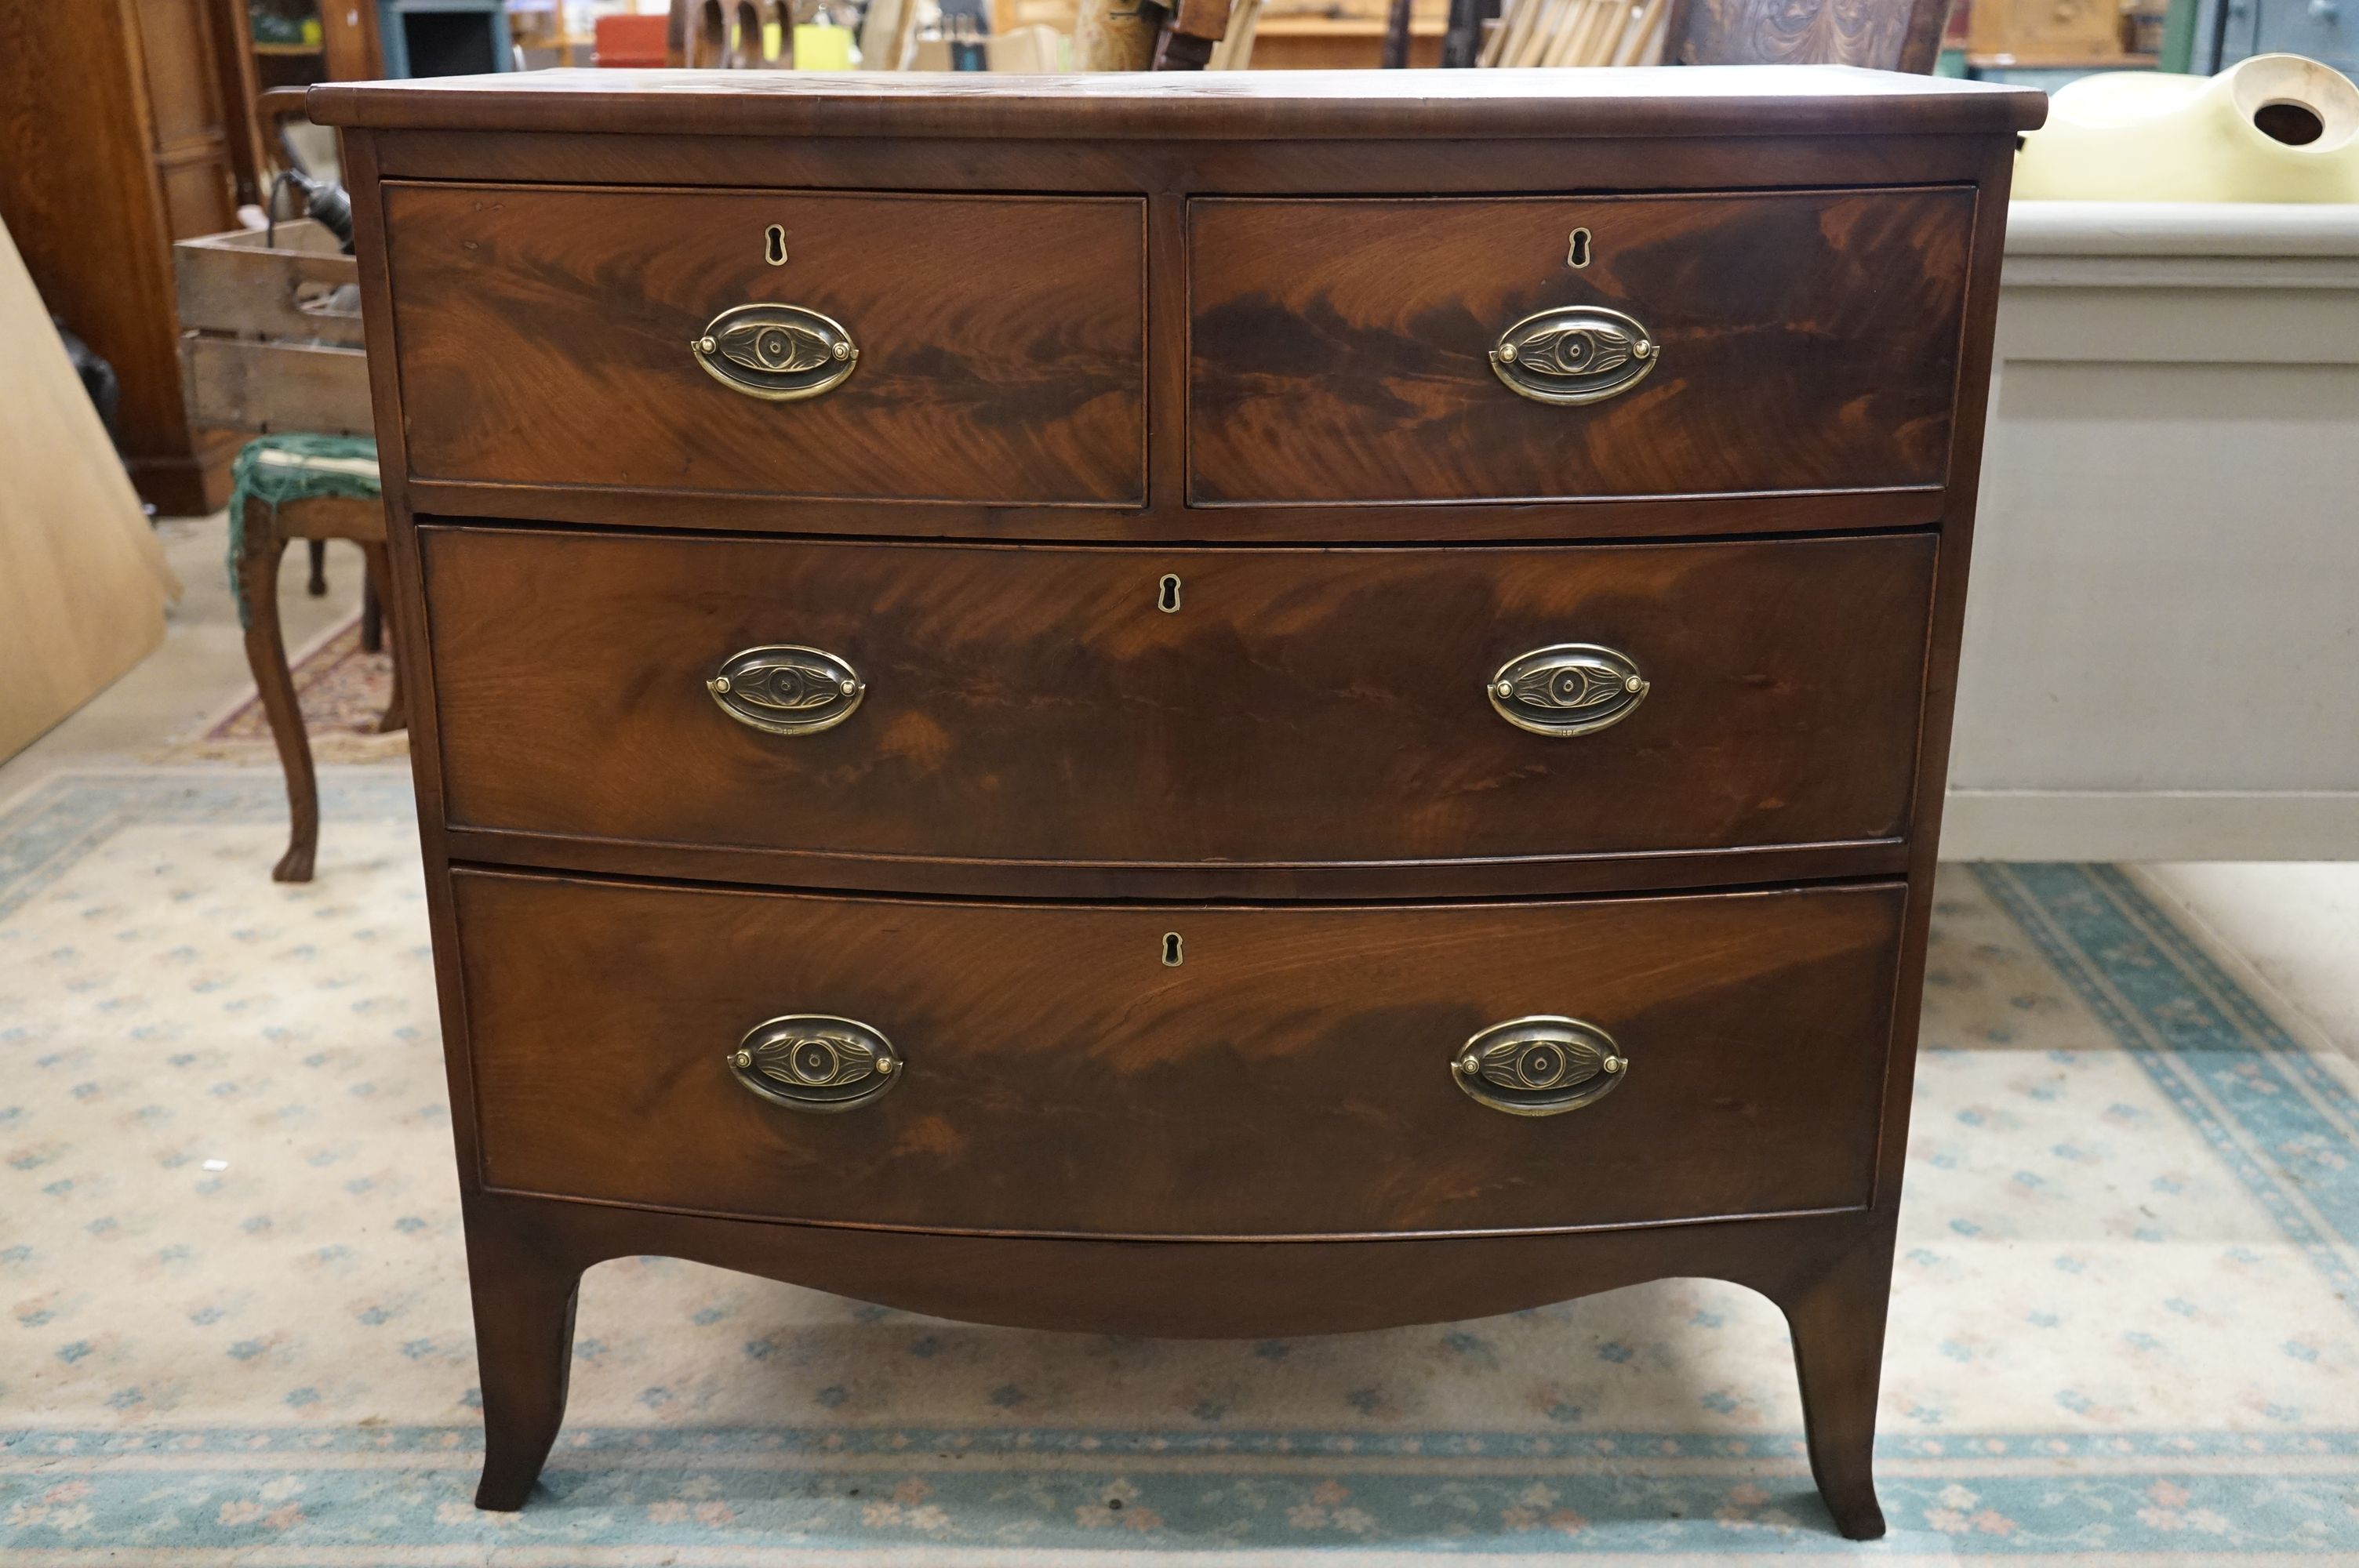 A 19th century mahogany bow front chest of 2 short and 2 long drawers of small proportions.